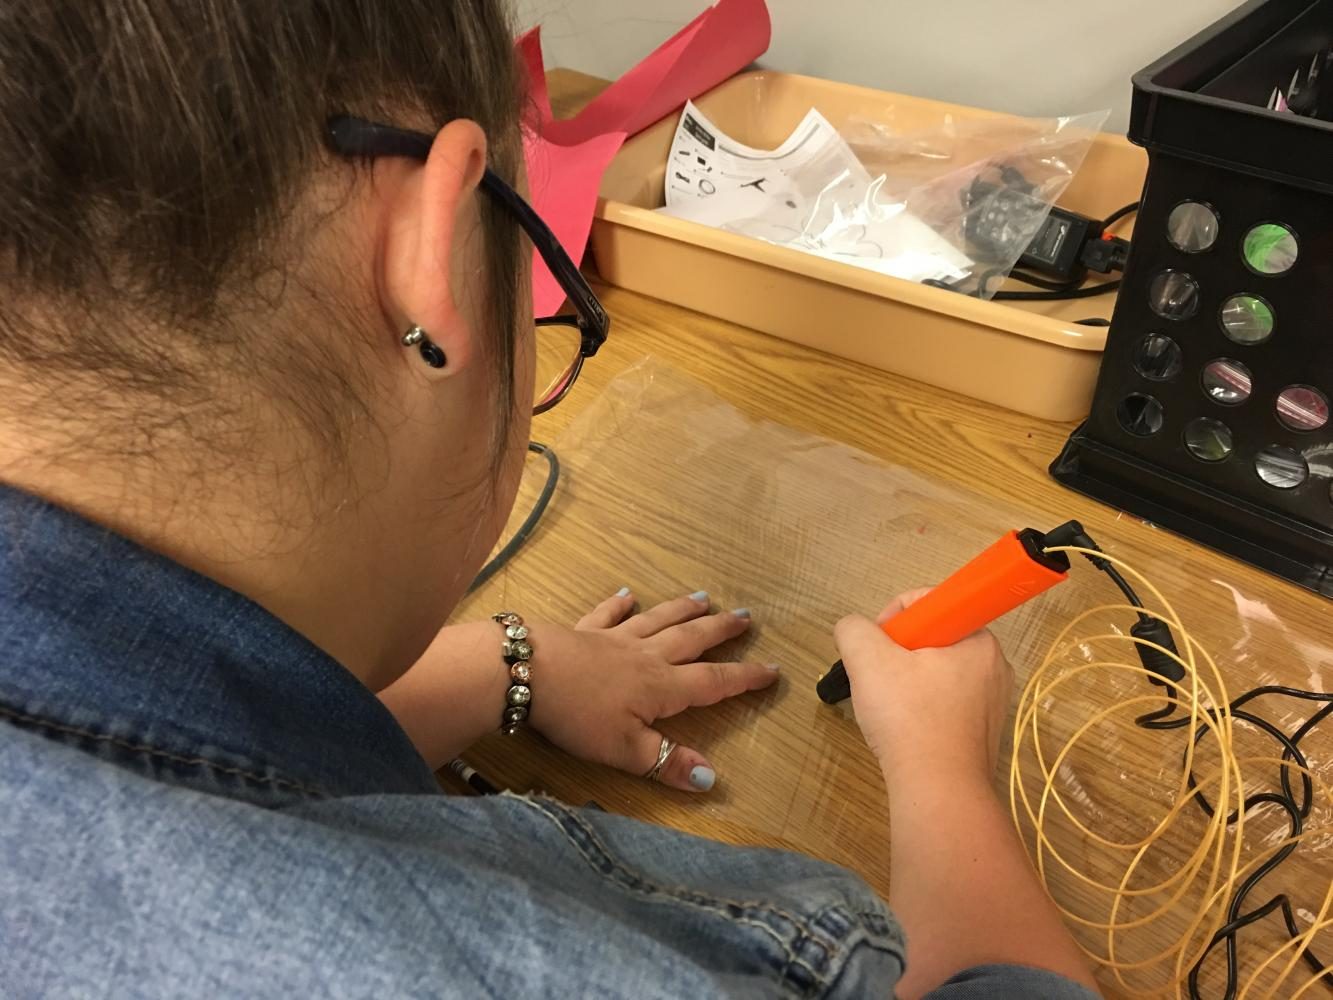 Senior Ali Beasley works with the new 3D pen in the 